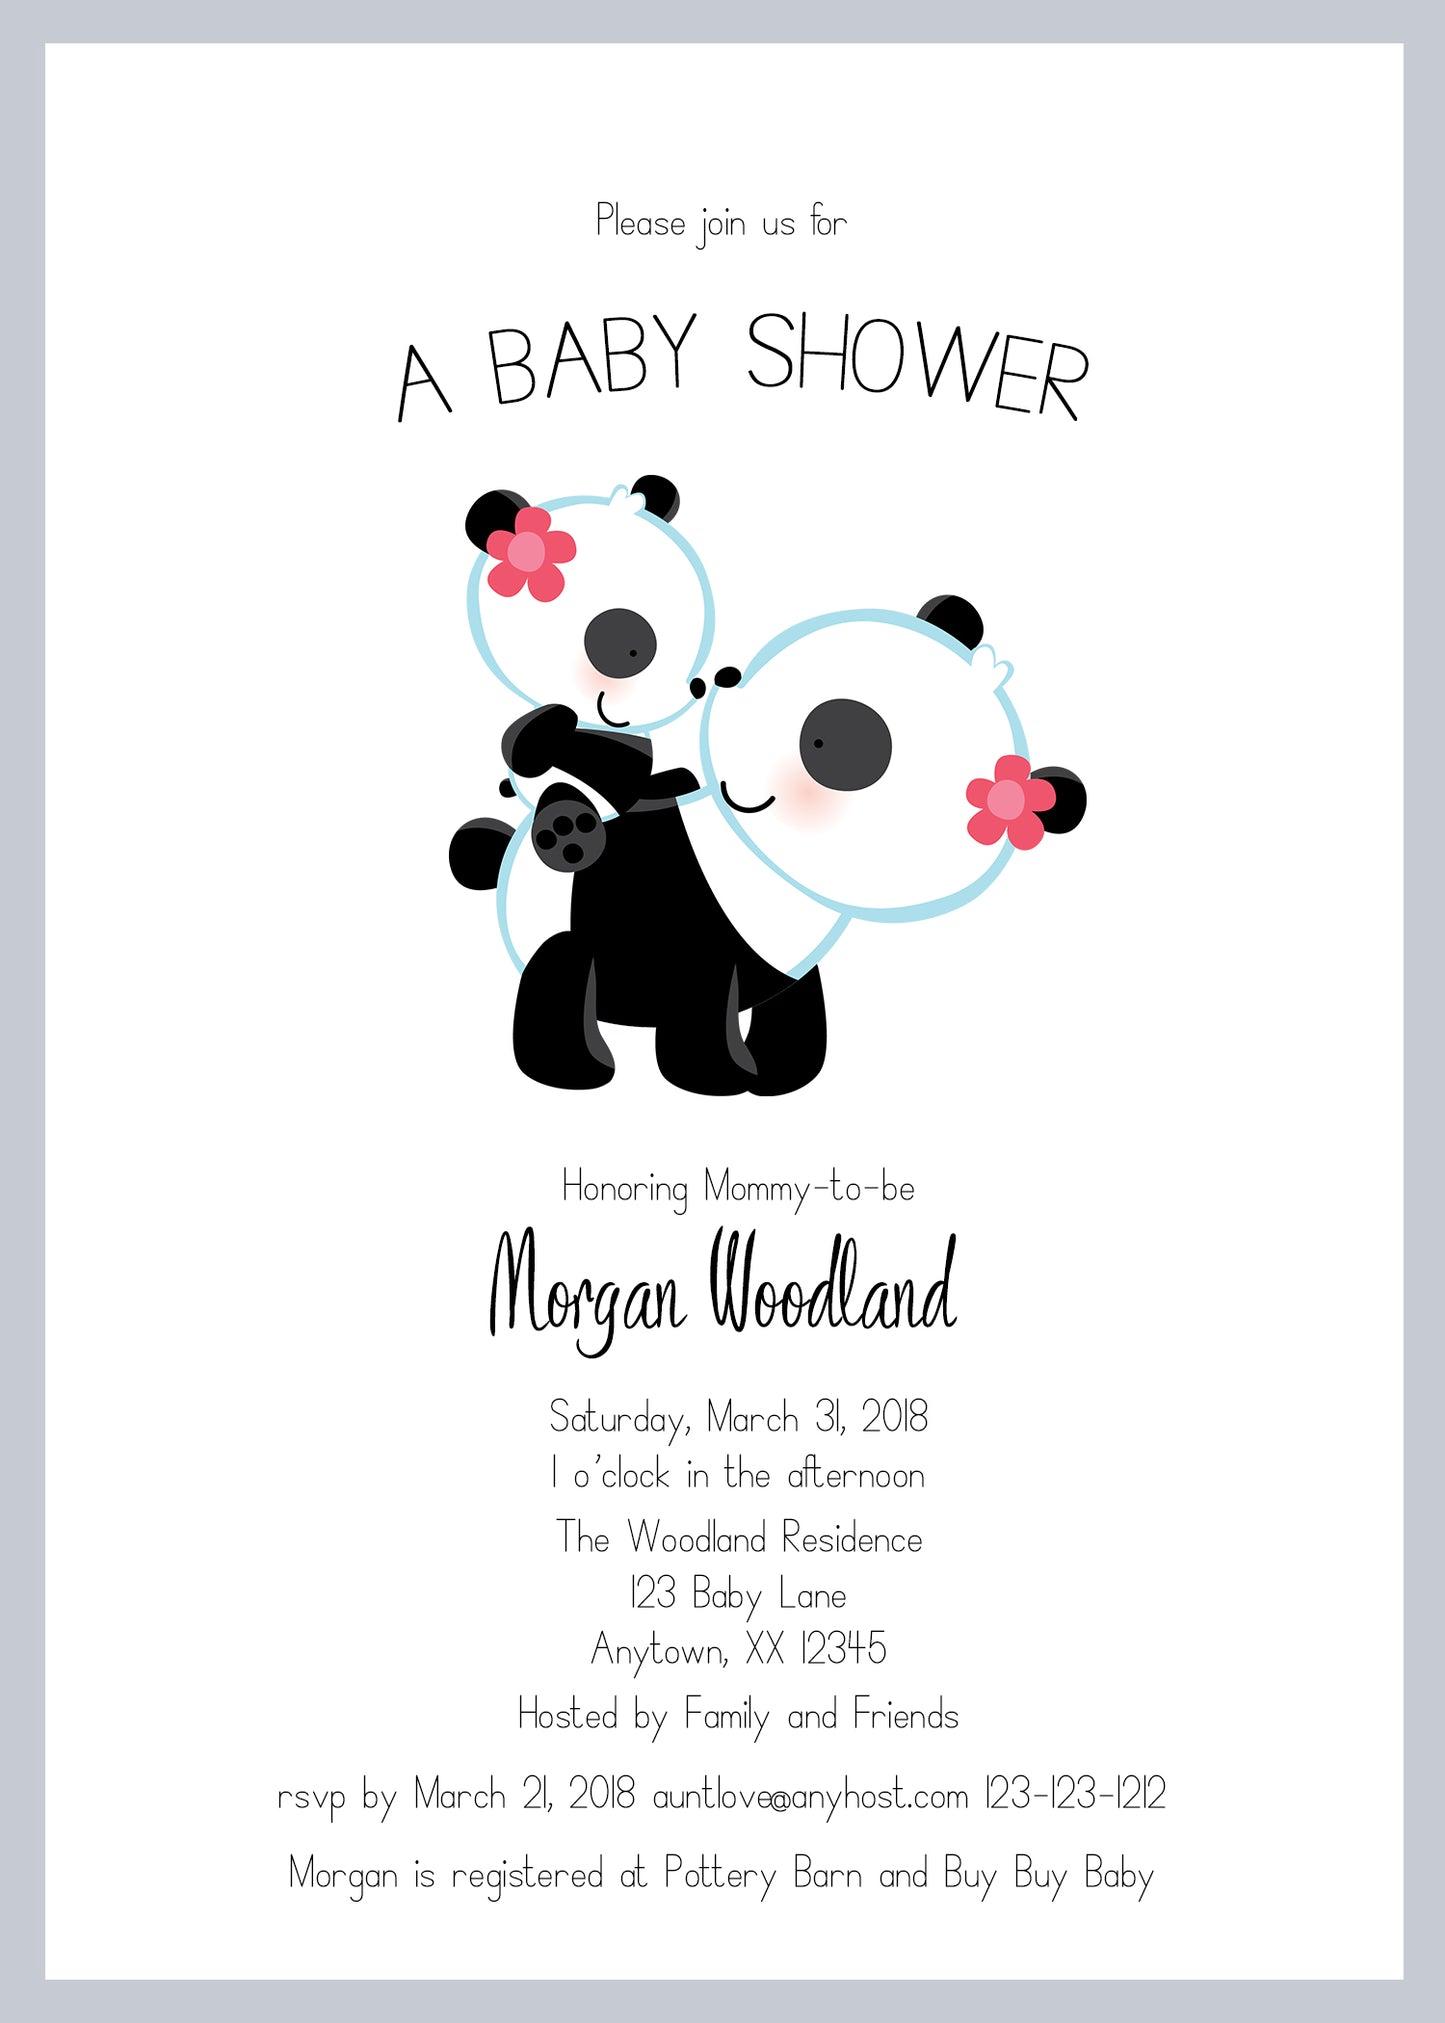 Mommy-to-be Panda Baby Shower Invitations - Invitetique